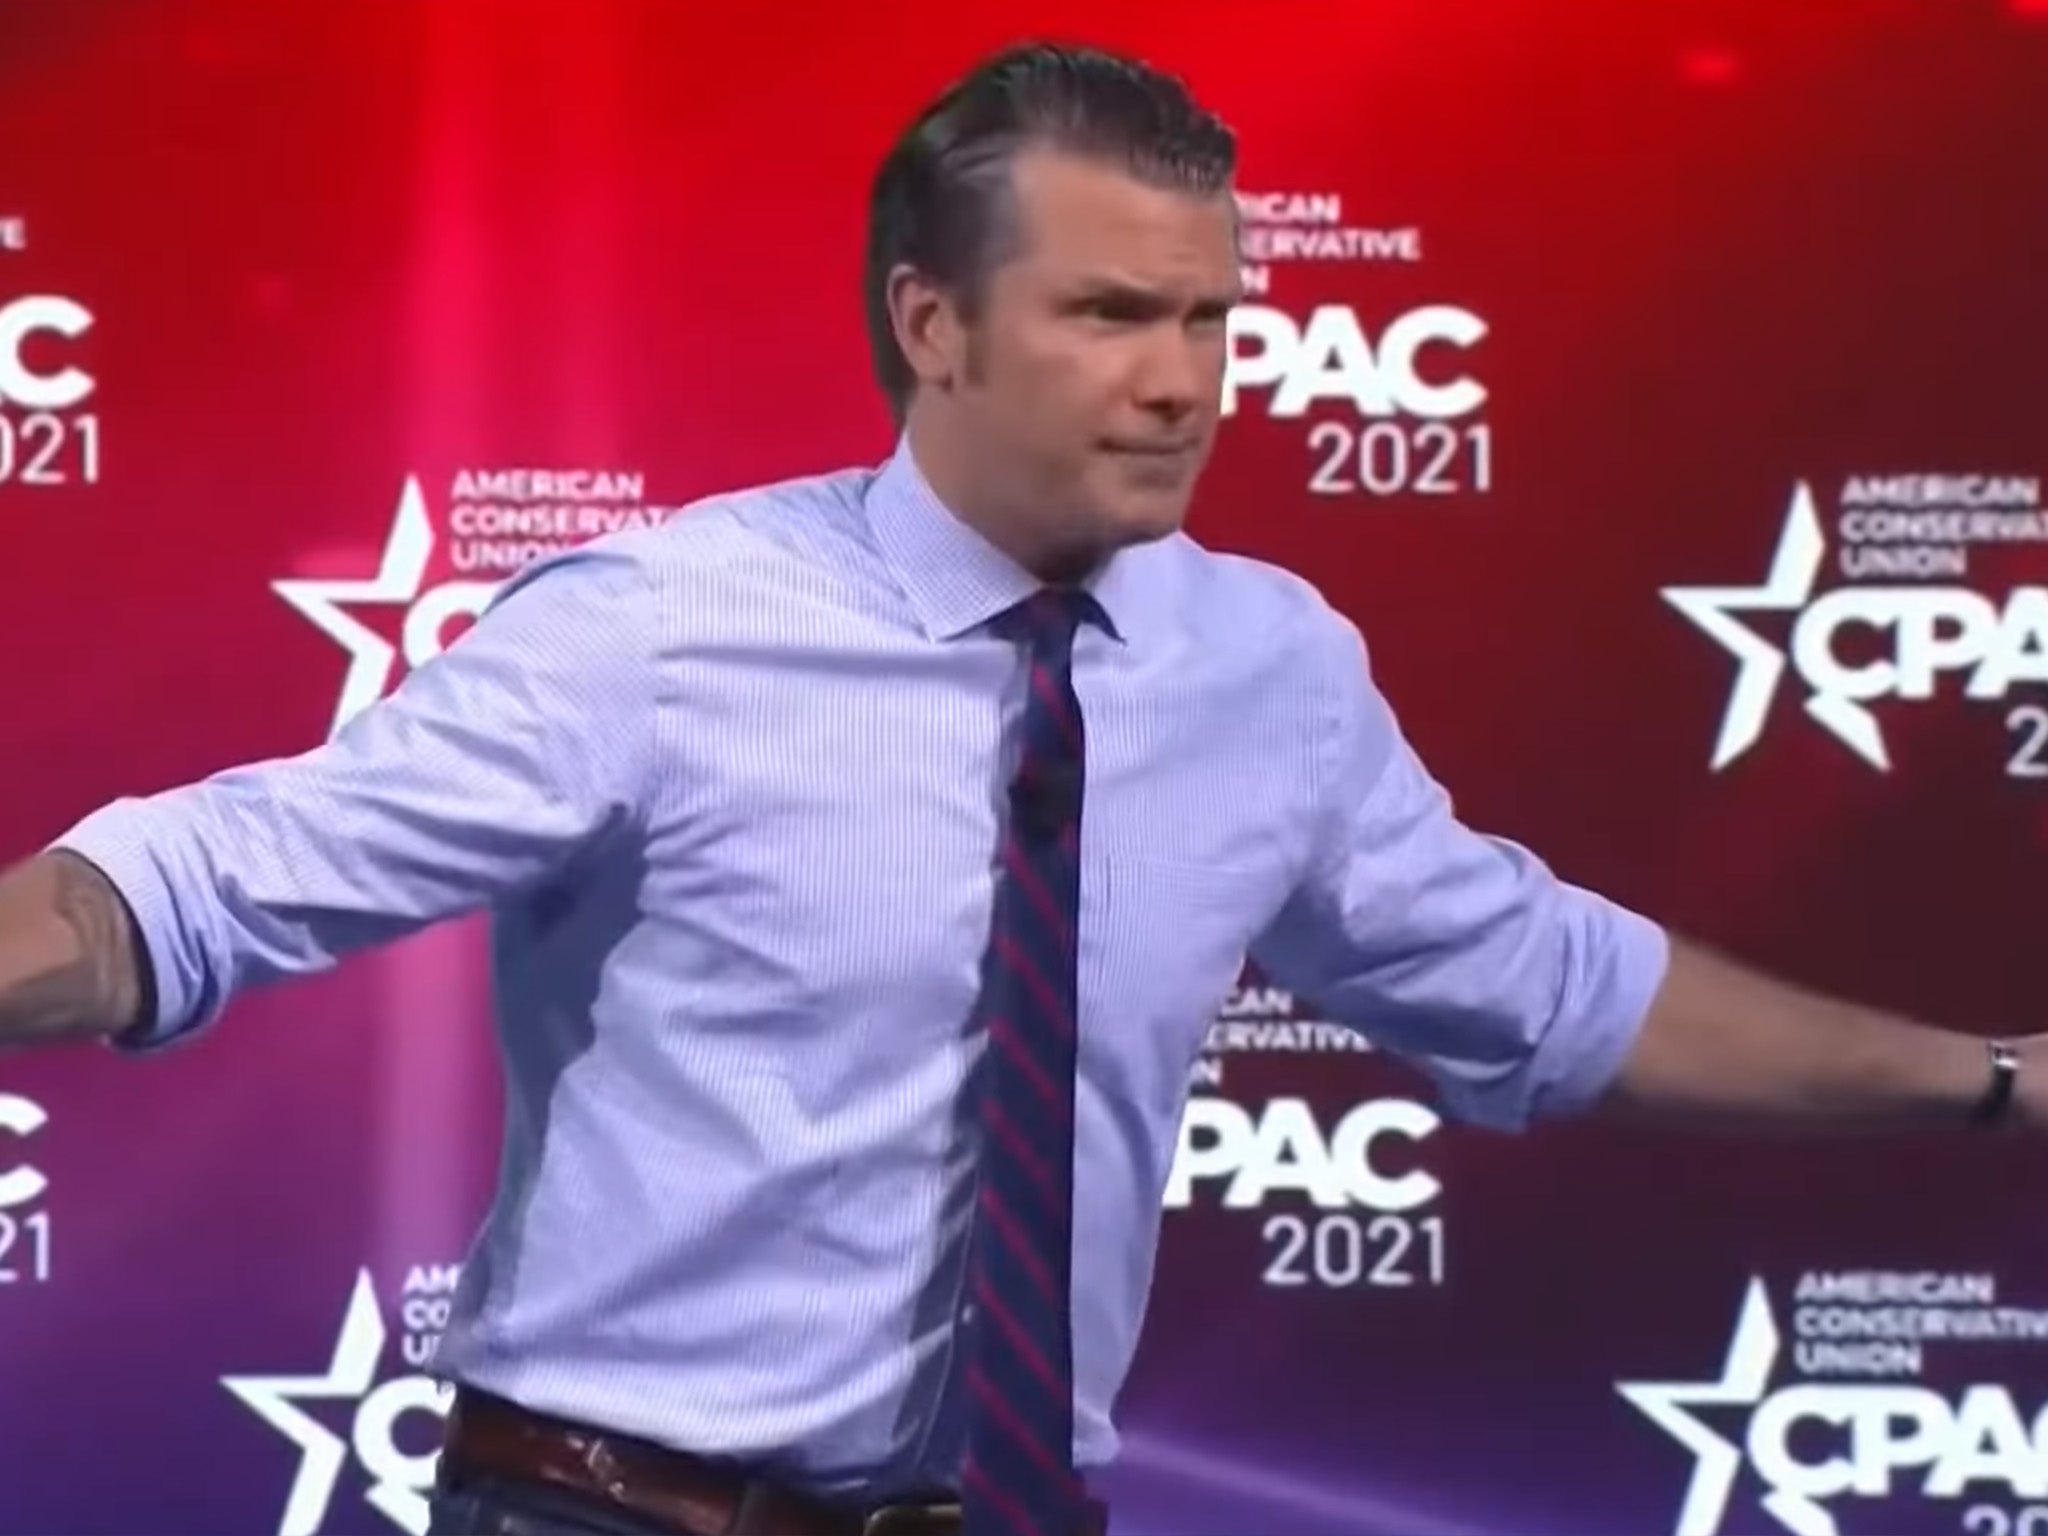 Pete Hegseth has been mocked following comments he made at CPAC